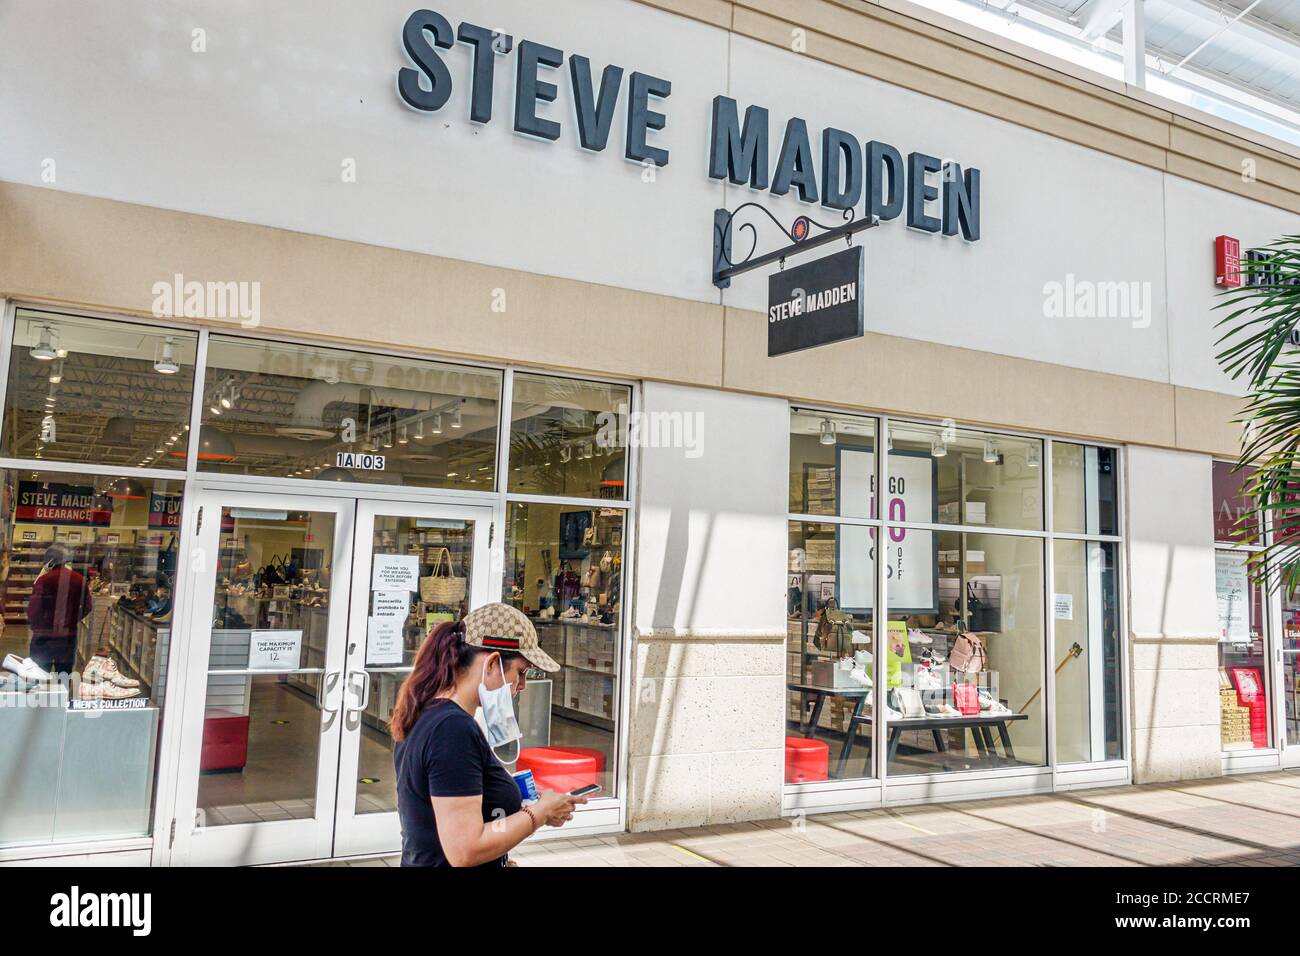 Steve madden sign hi-res stock photography and images - Alamy